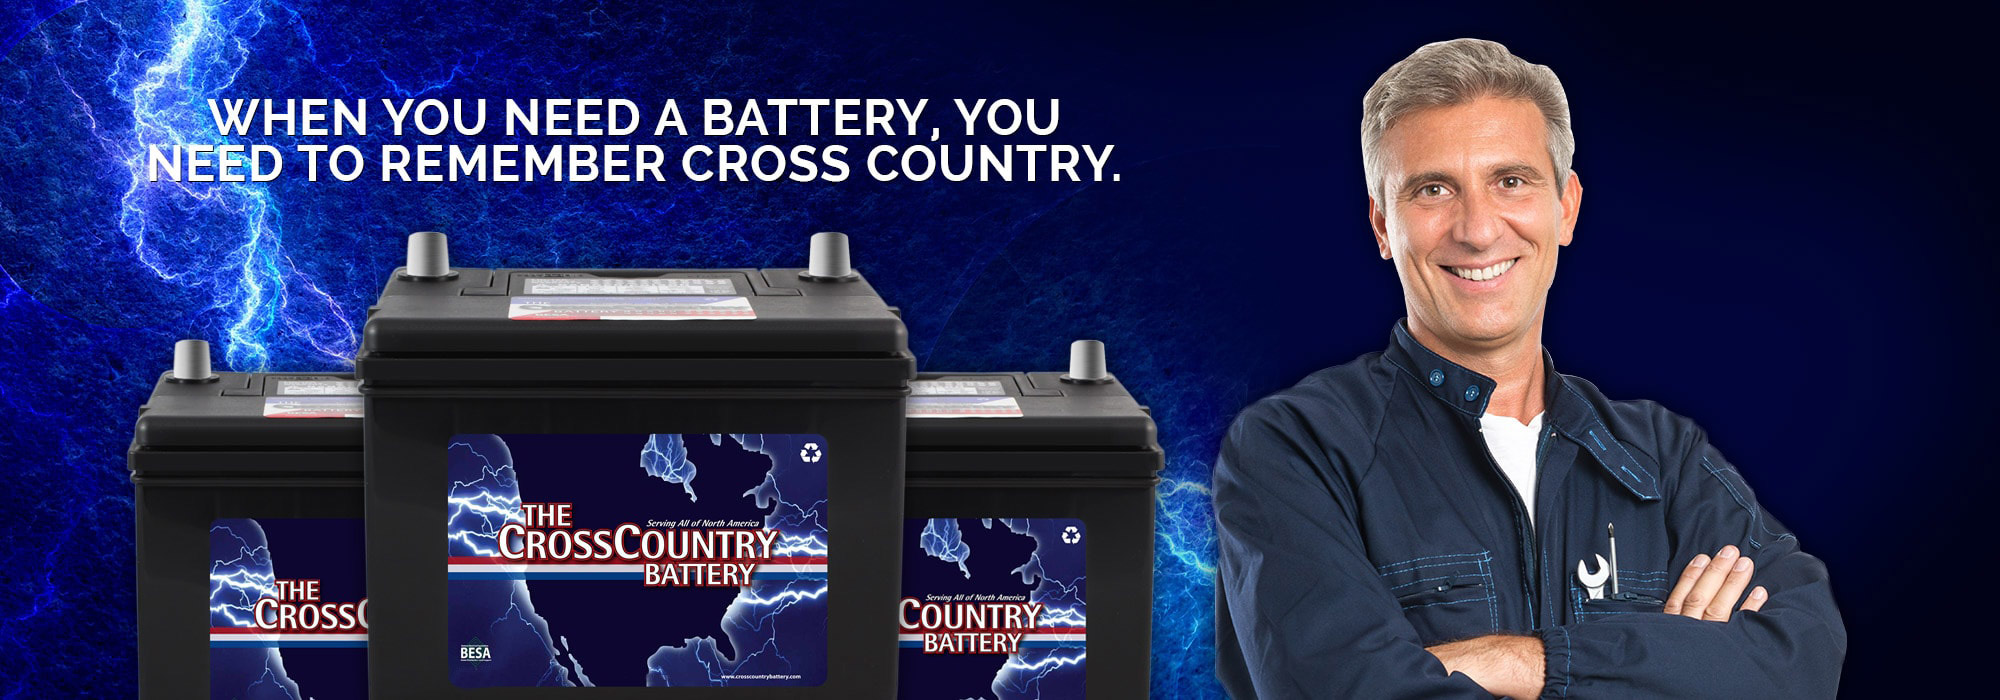 Cross Country Battery